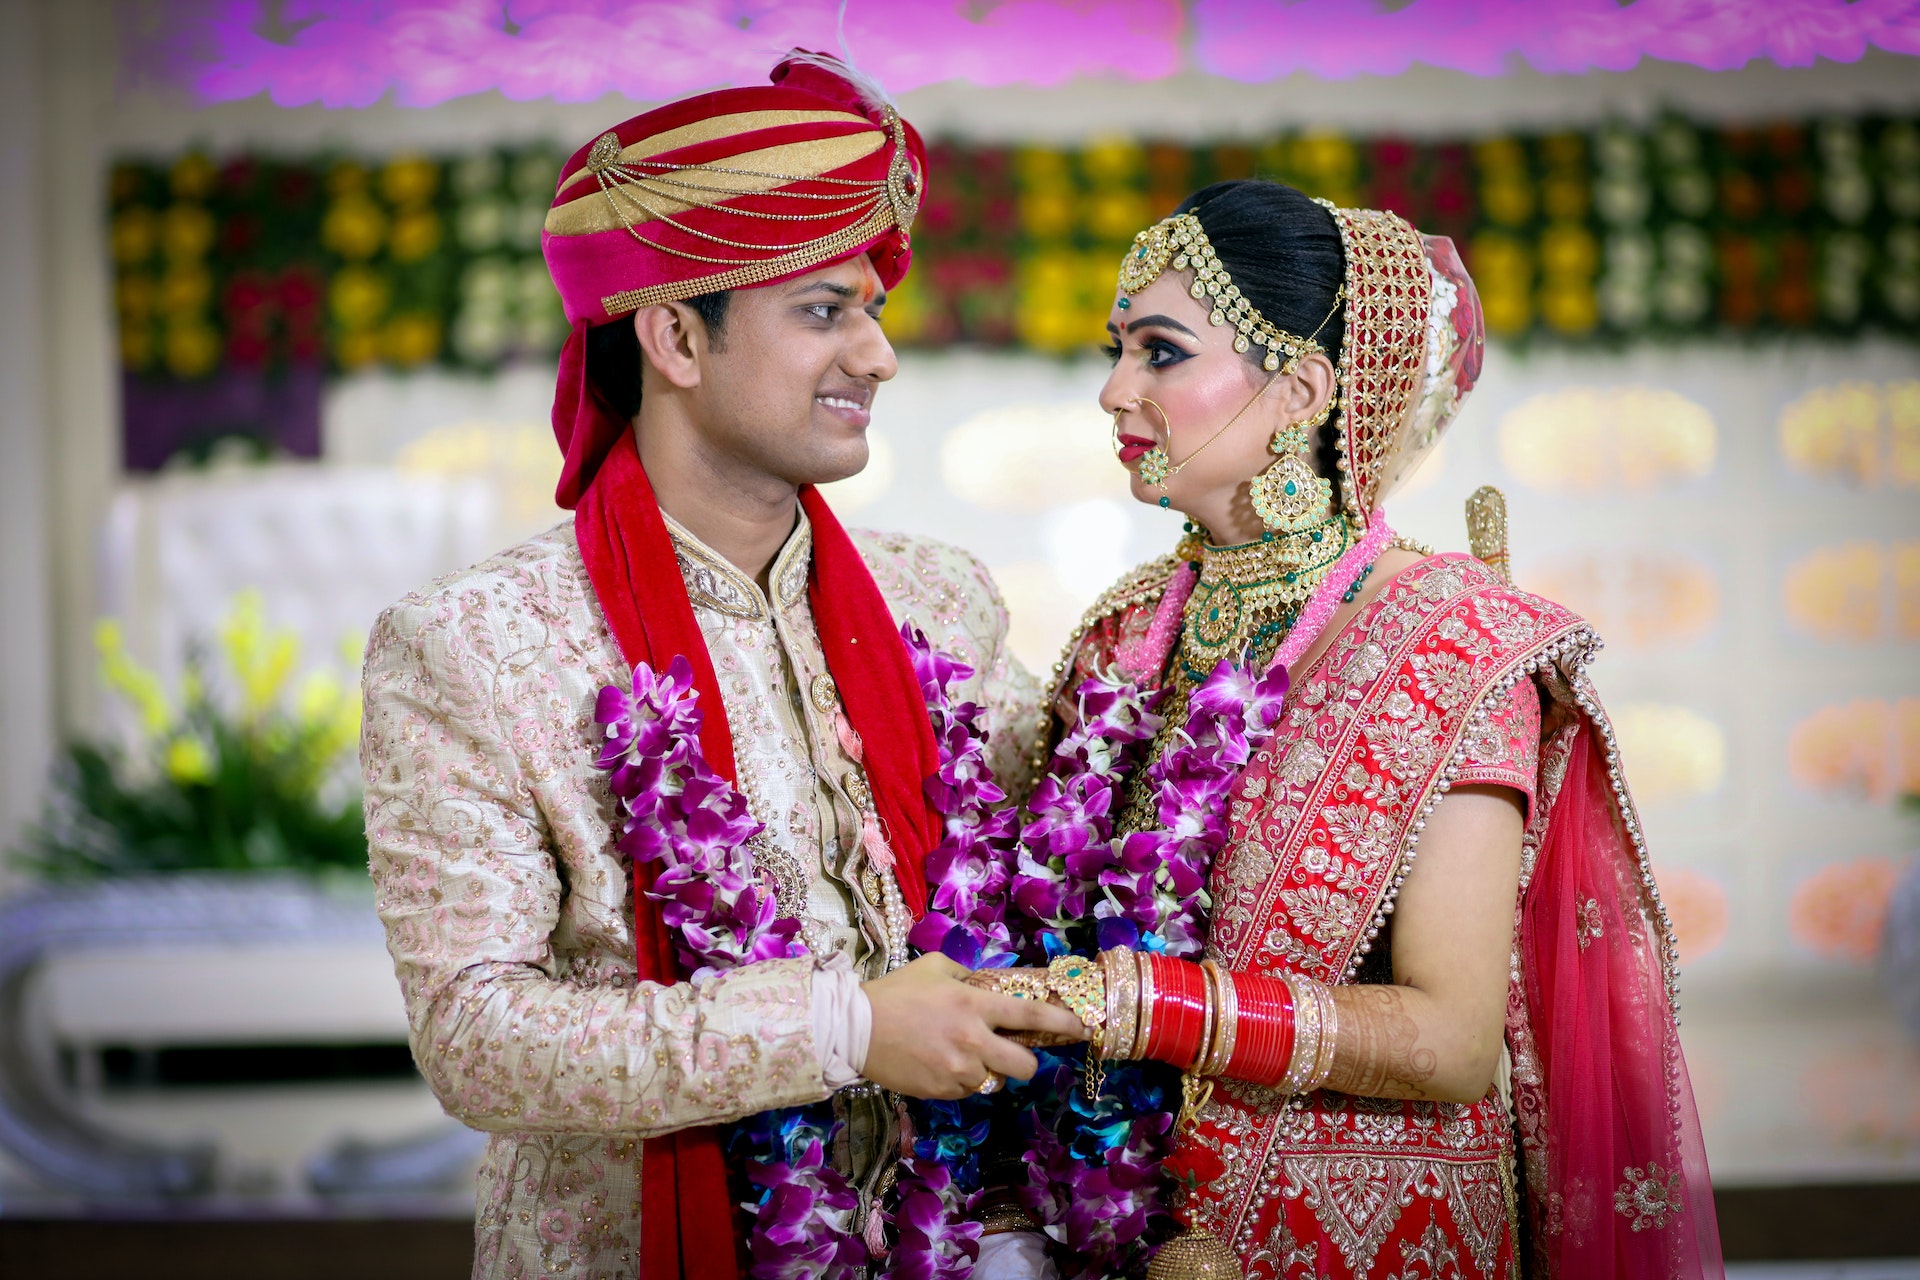 What is the dress code for a pre wedding Indian cocktail party? - Quora